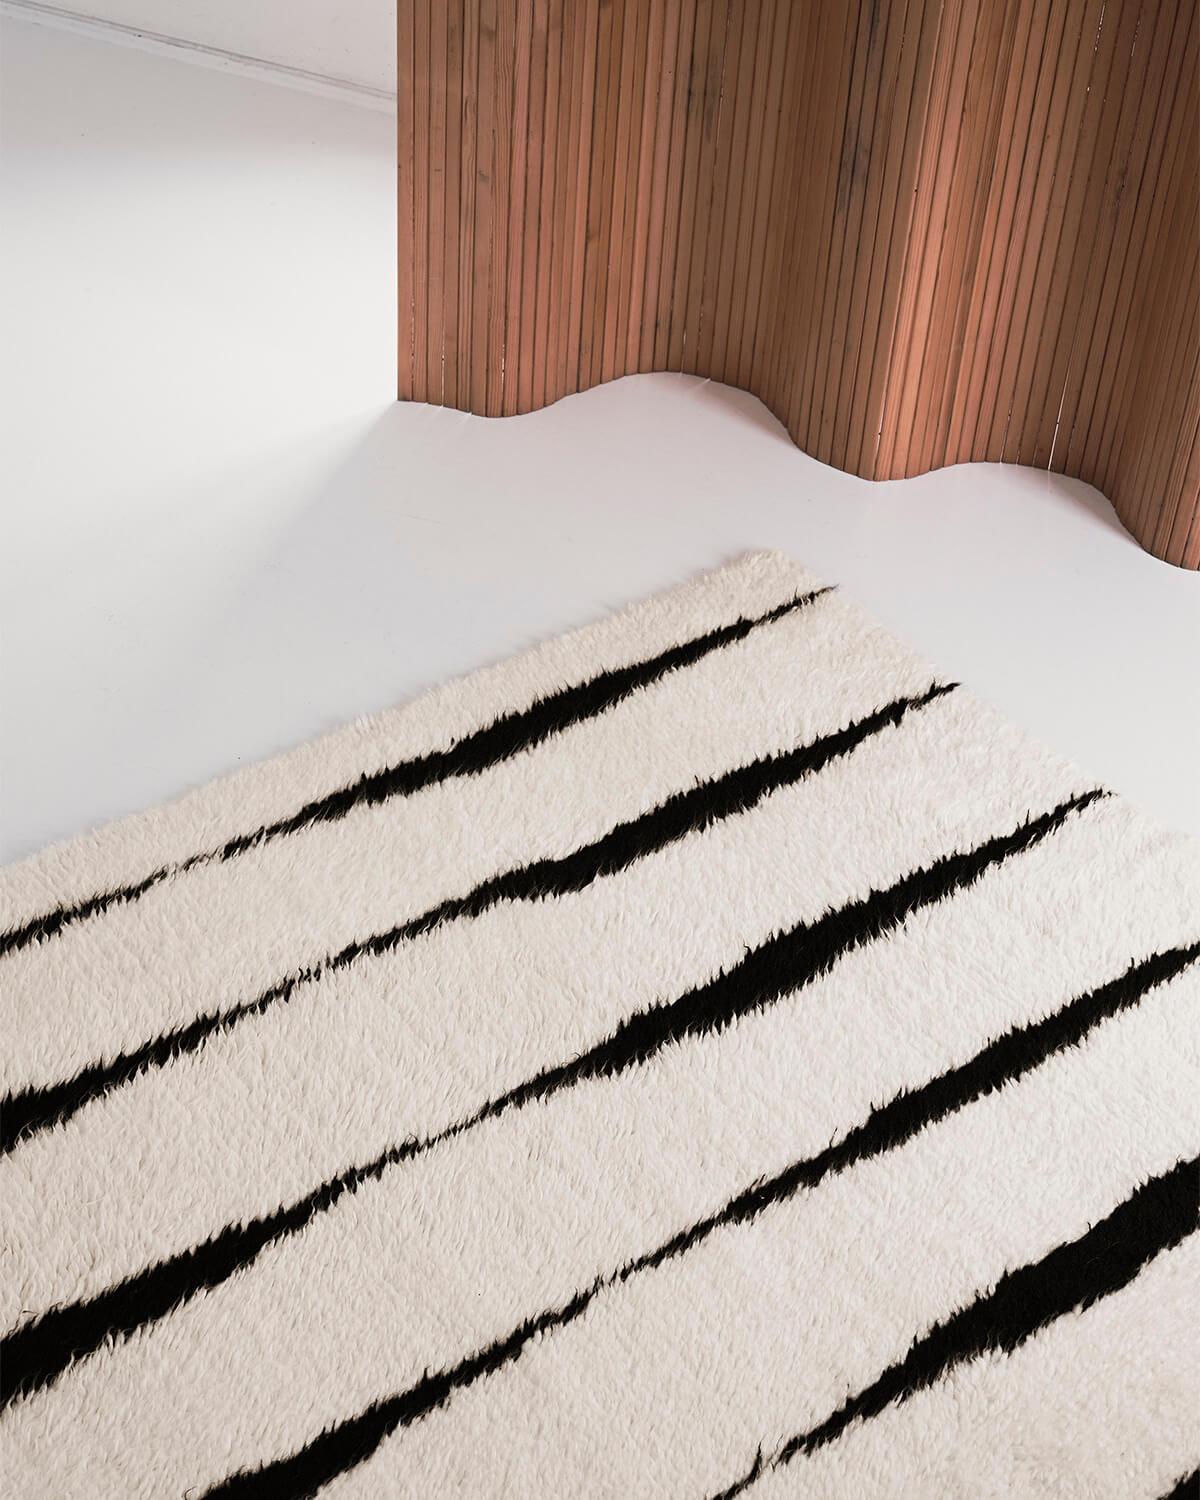 A fjord or fiord is a long, narrow inlet with steep sides or cliffs, created by a glacier. This design is inspired by the Norwegian coastline and it’s estimated 1,200 fjords. 

This shaggy rug is made with New Zealand wool for great quality and a